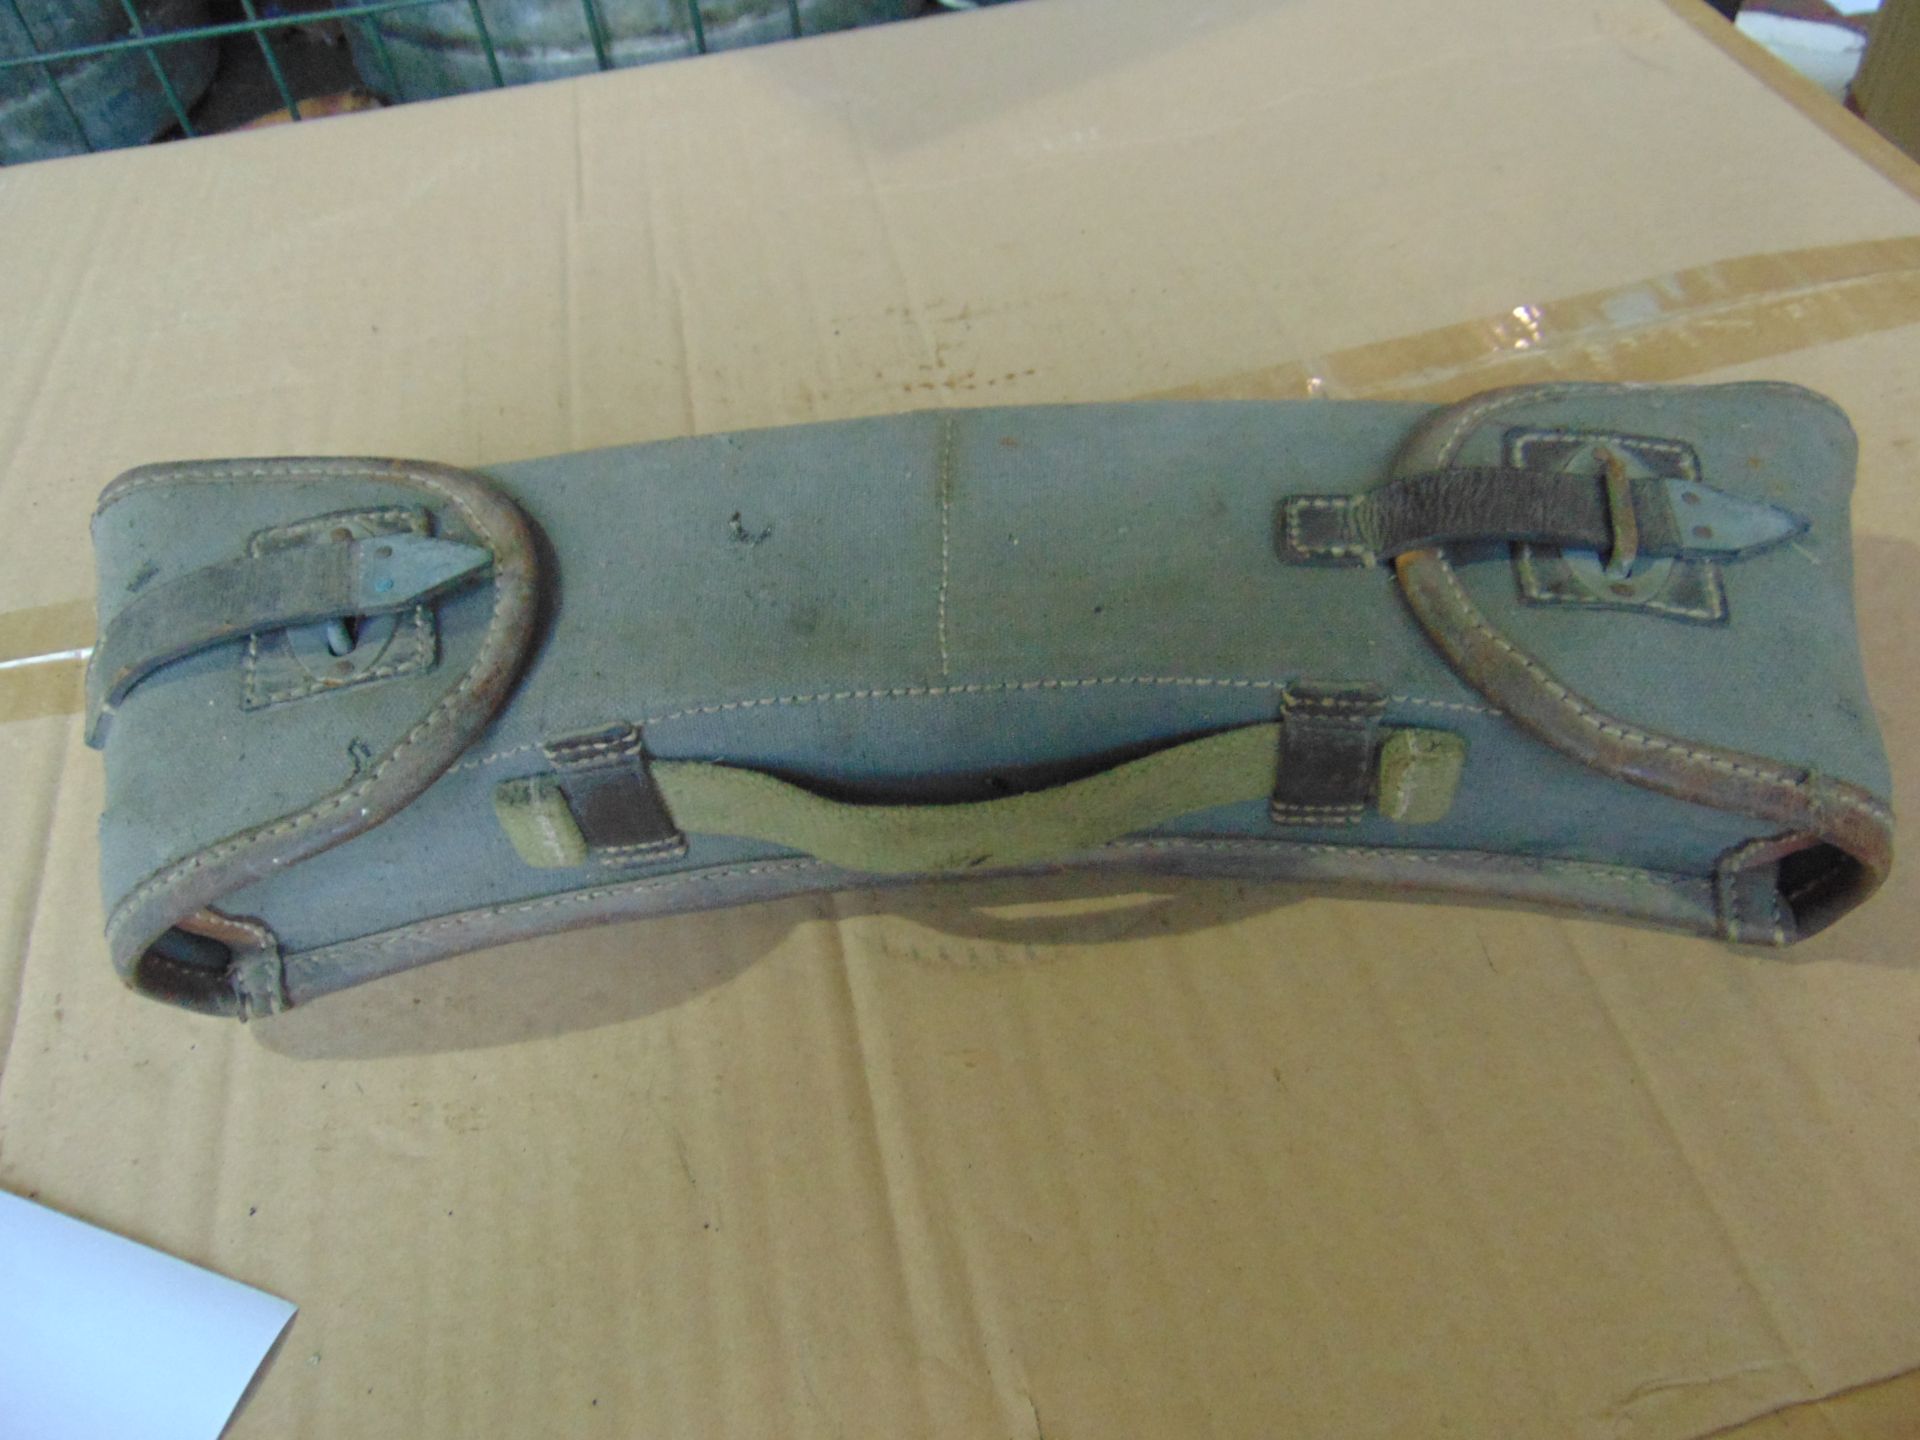 ORIGINAL GERMAN WW2 MG 13 MAGAZINE POUCH IN EXCELLENT CONDITION - Image 2 of 6